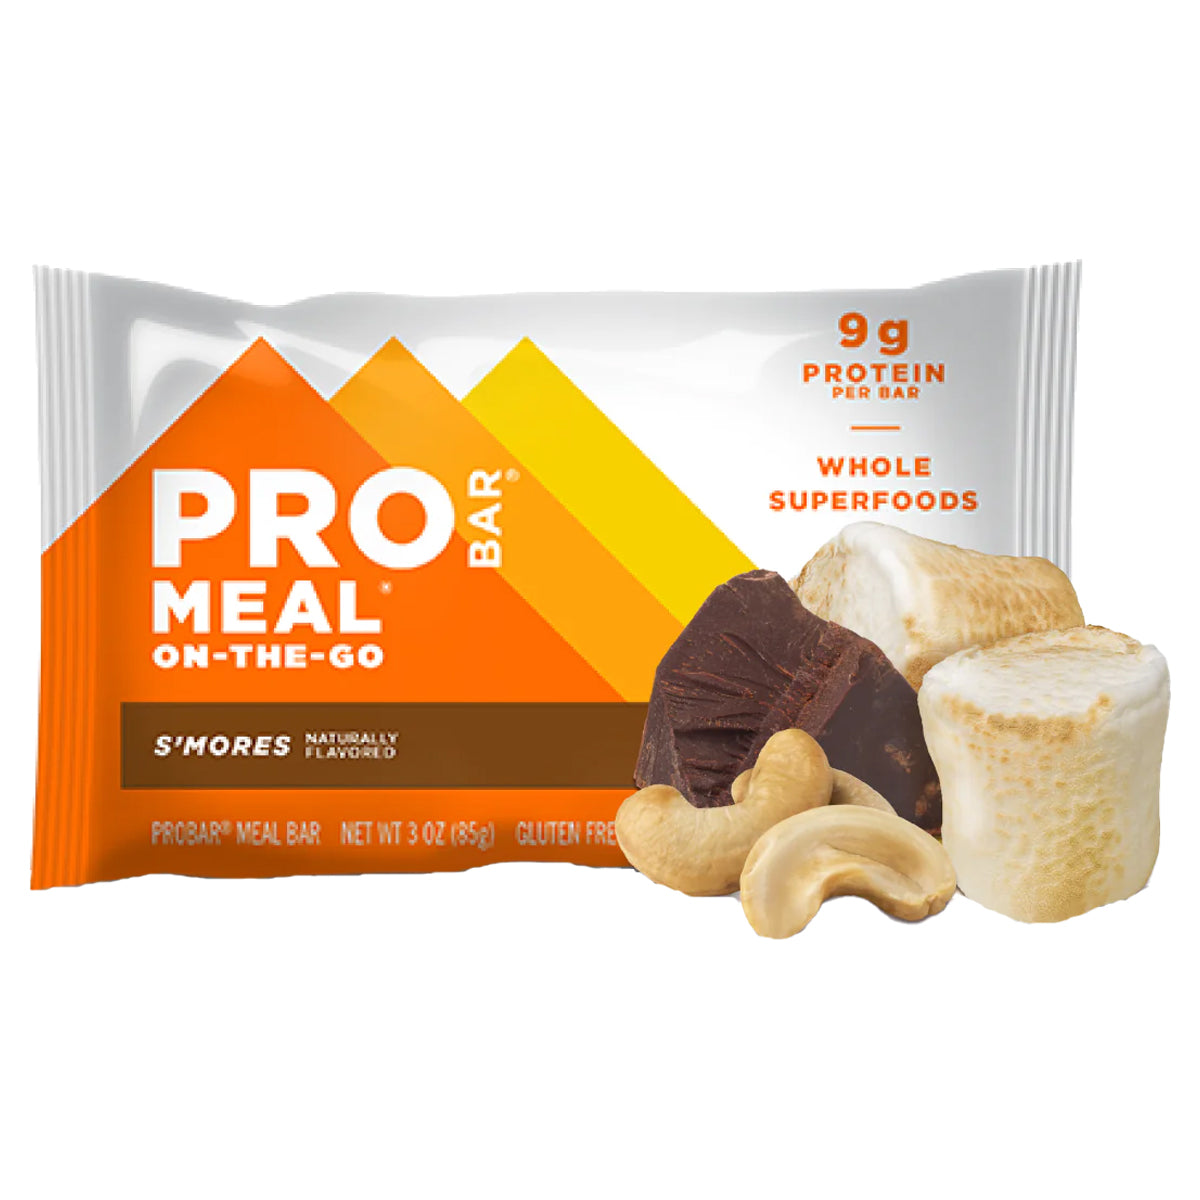 PROBAR Meal Bar in S'mores by GOHUNT | Pro Bar - GOHUNT Shop